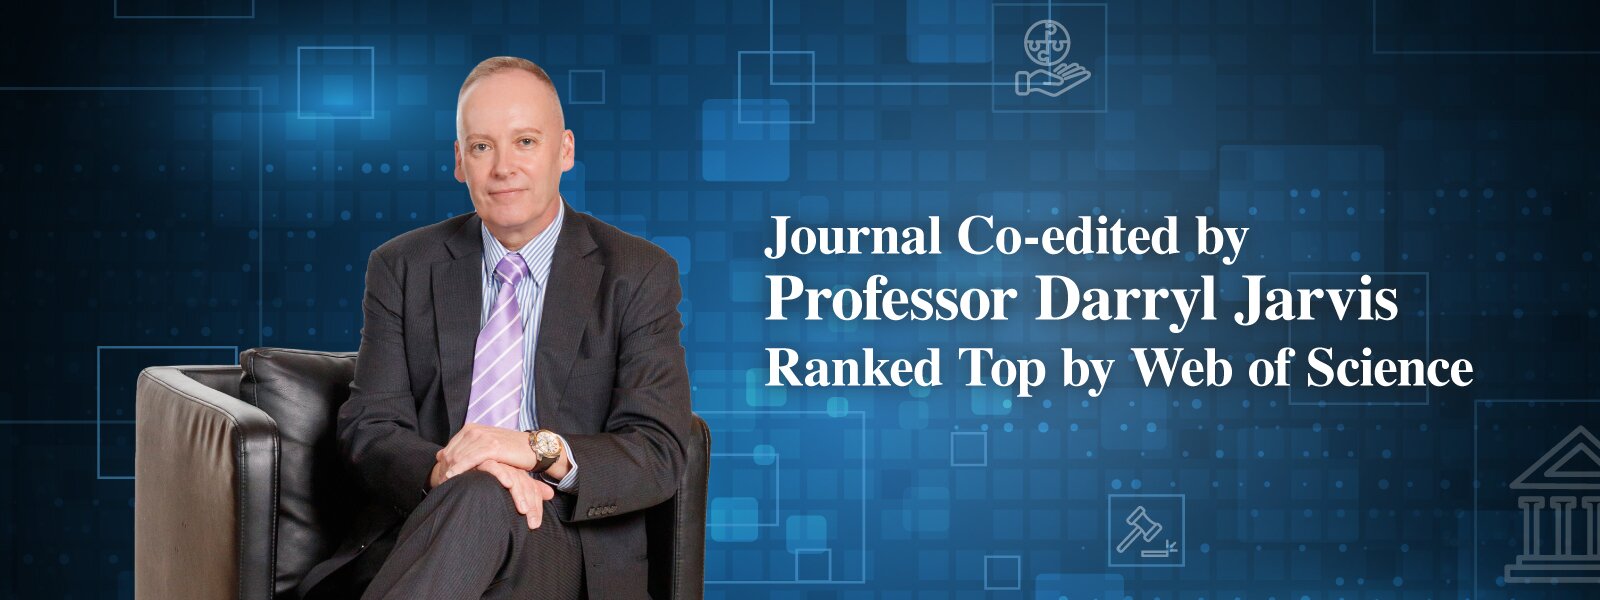 Journal Co-edited by Professor Darryl Jarvis Ranked Top by Web of Science